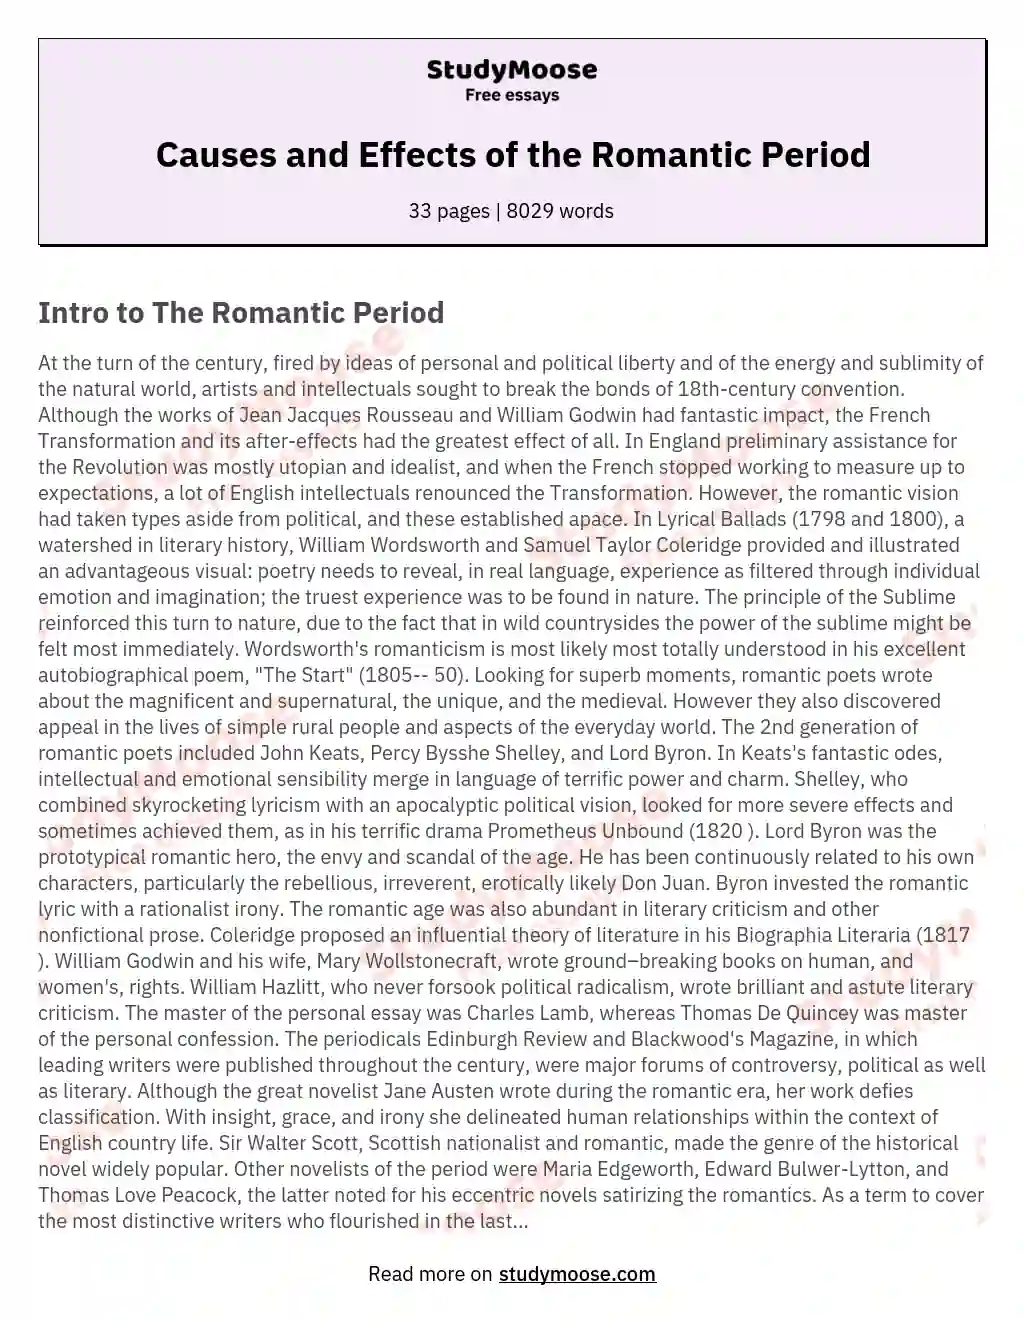 Causes and Effects of the Romantic Period essay